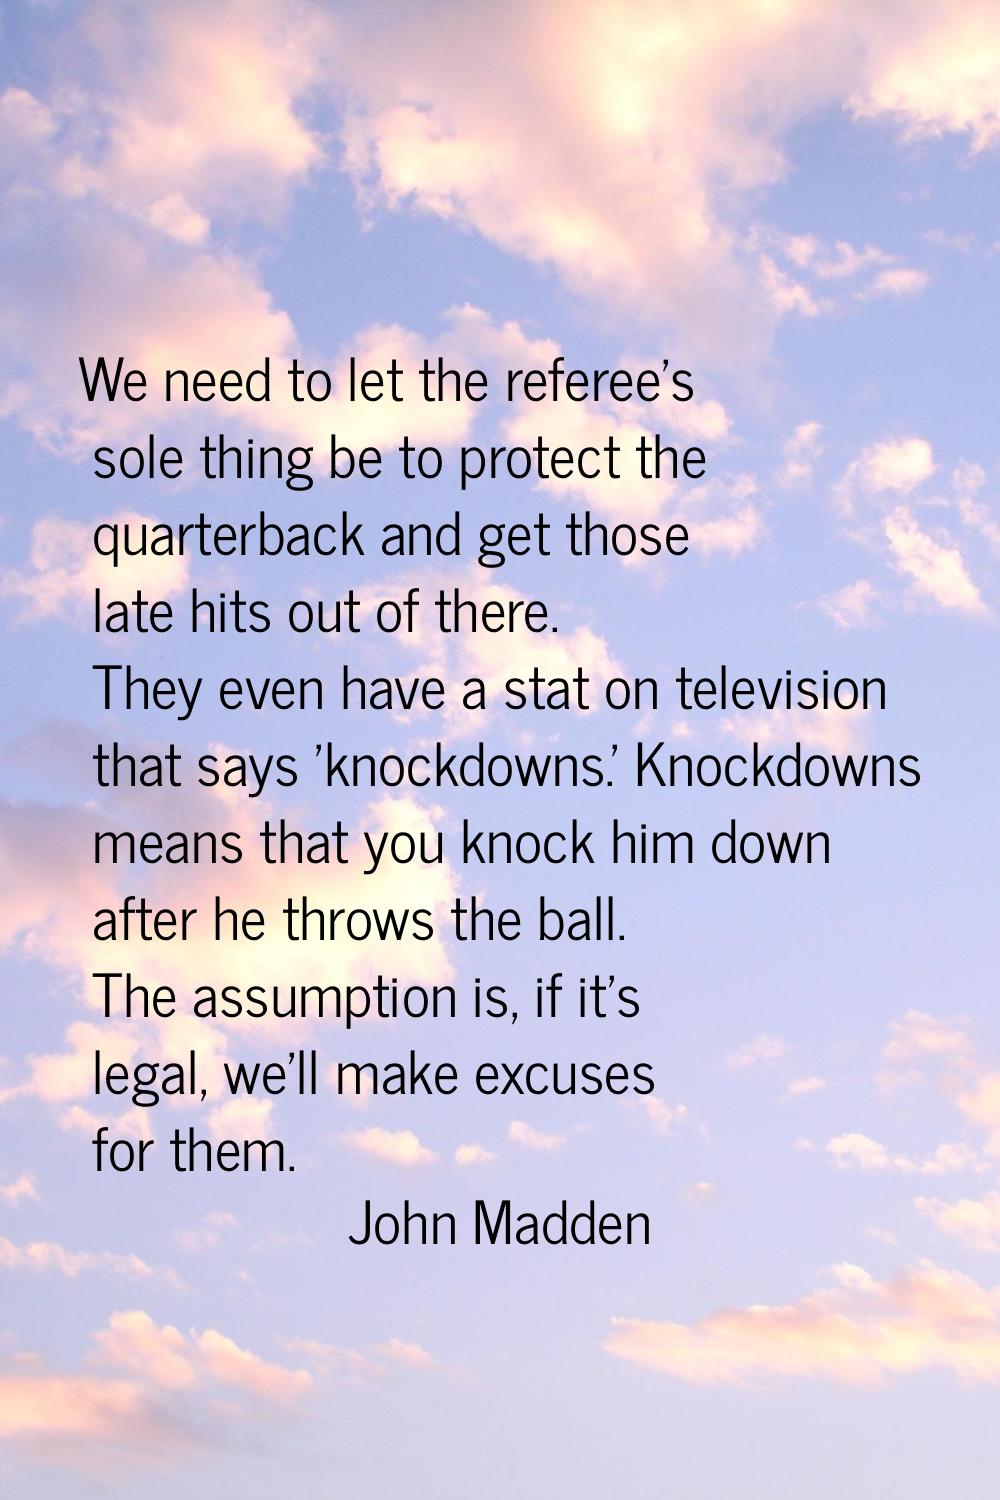 We need to let the referee's sole thing be to protect the quarterback and get those late hits out o